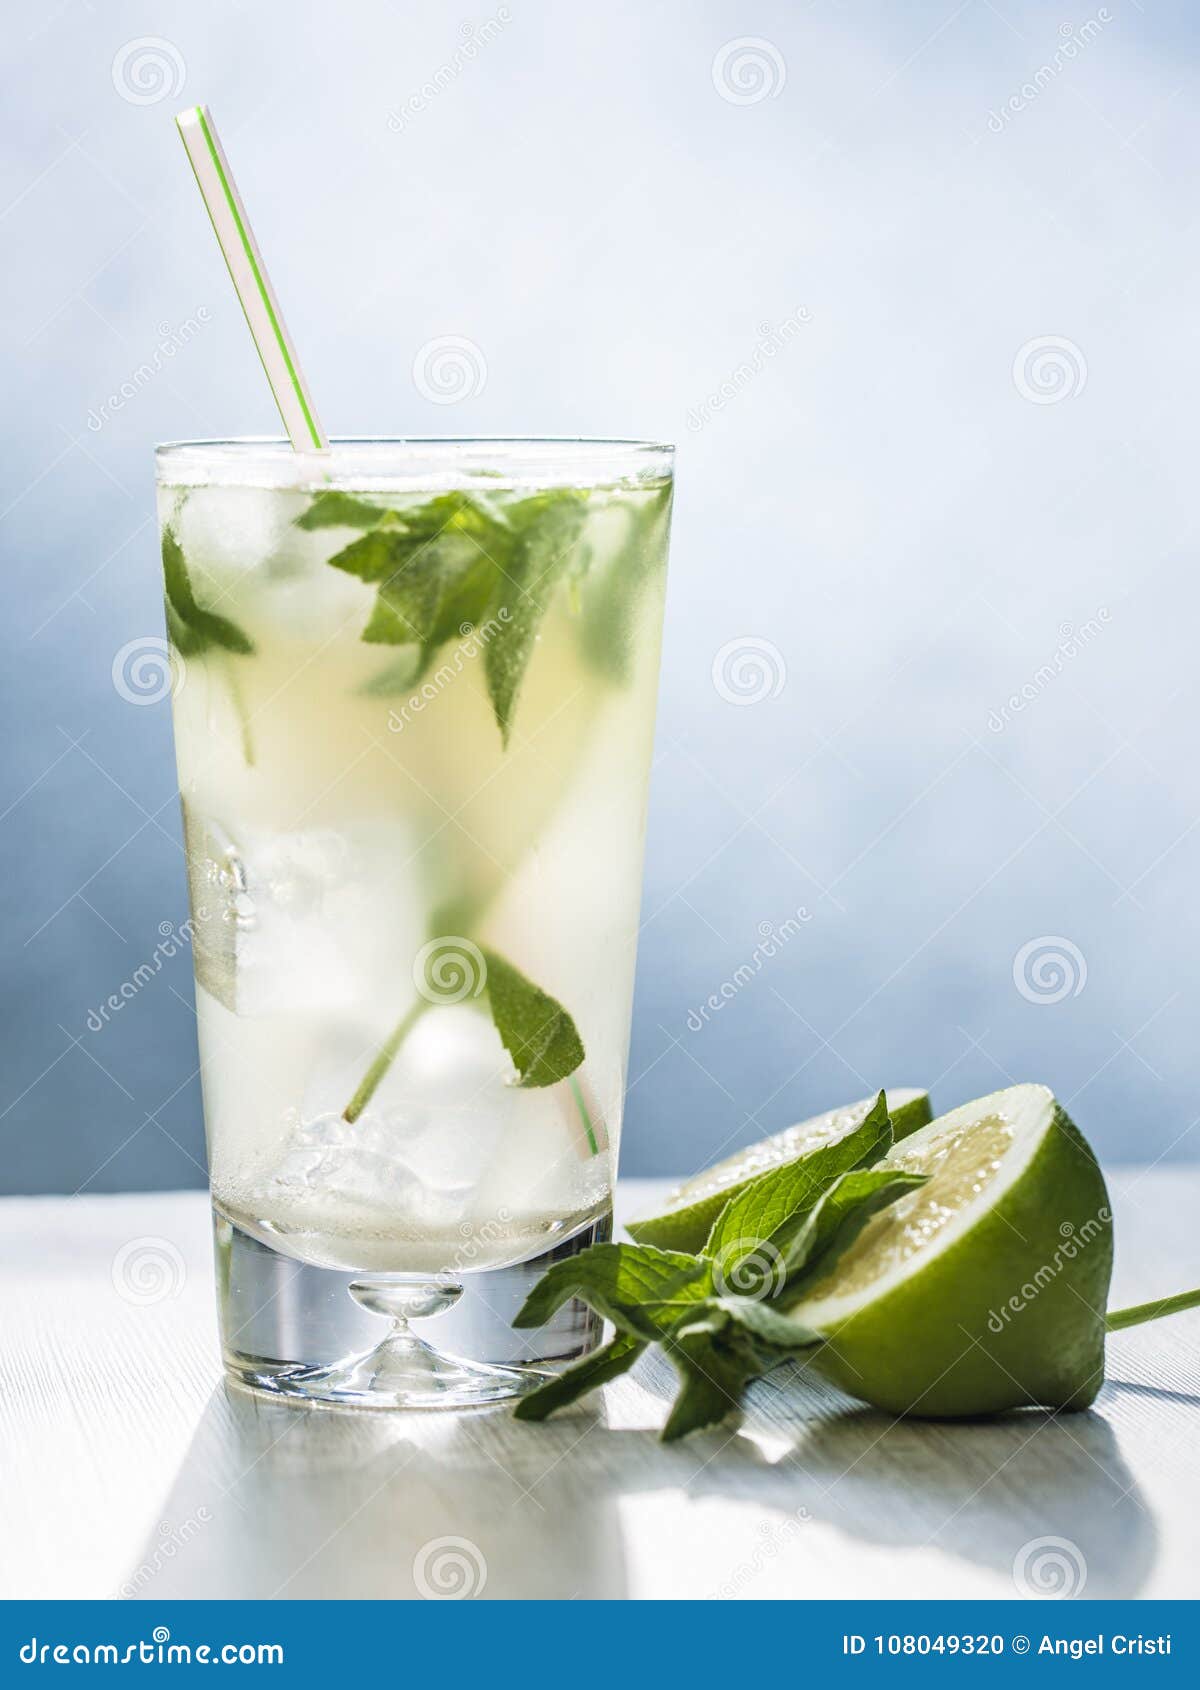 mojito cocktail with lime, sugar, ice and mint leaves in the gray background.